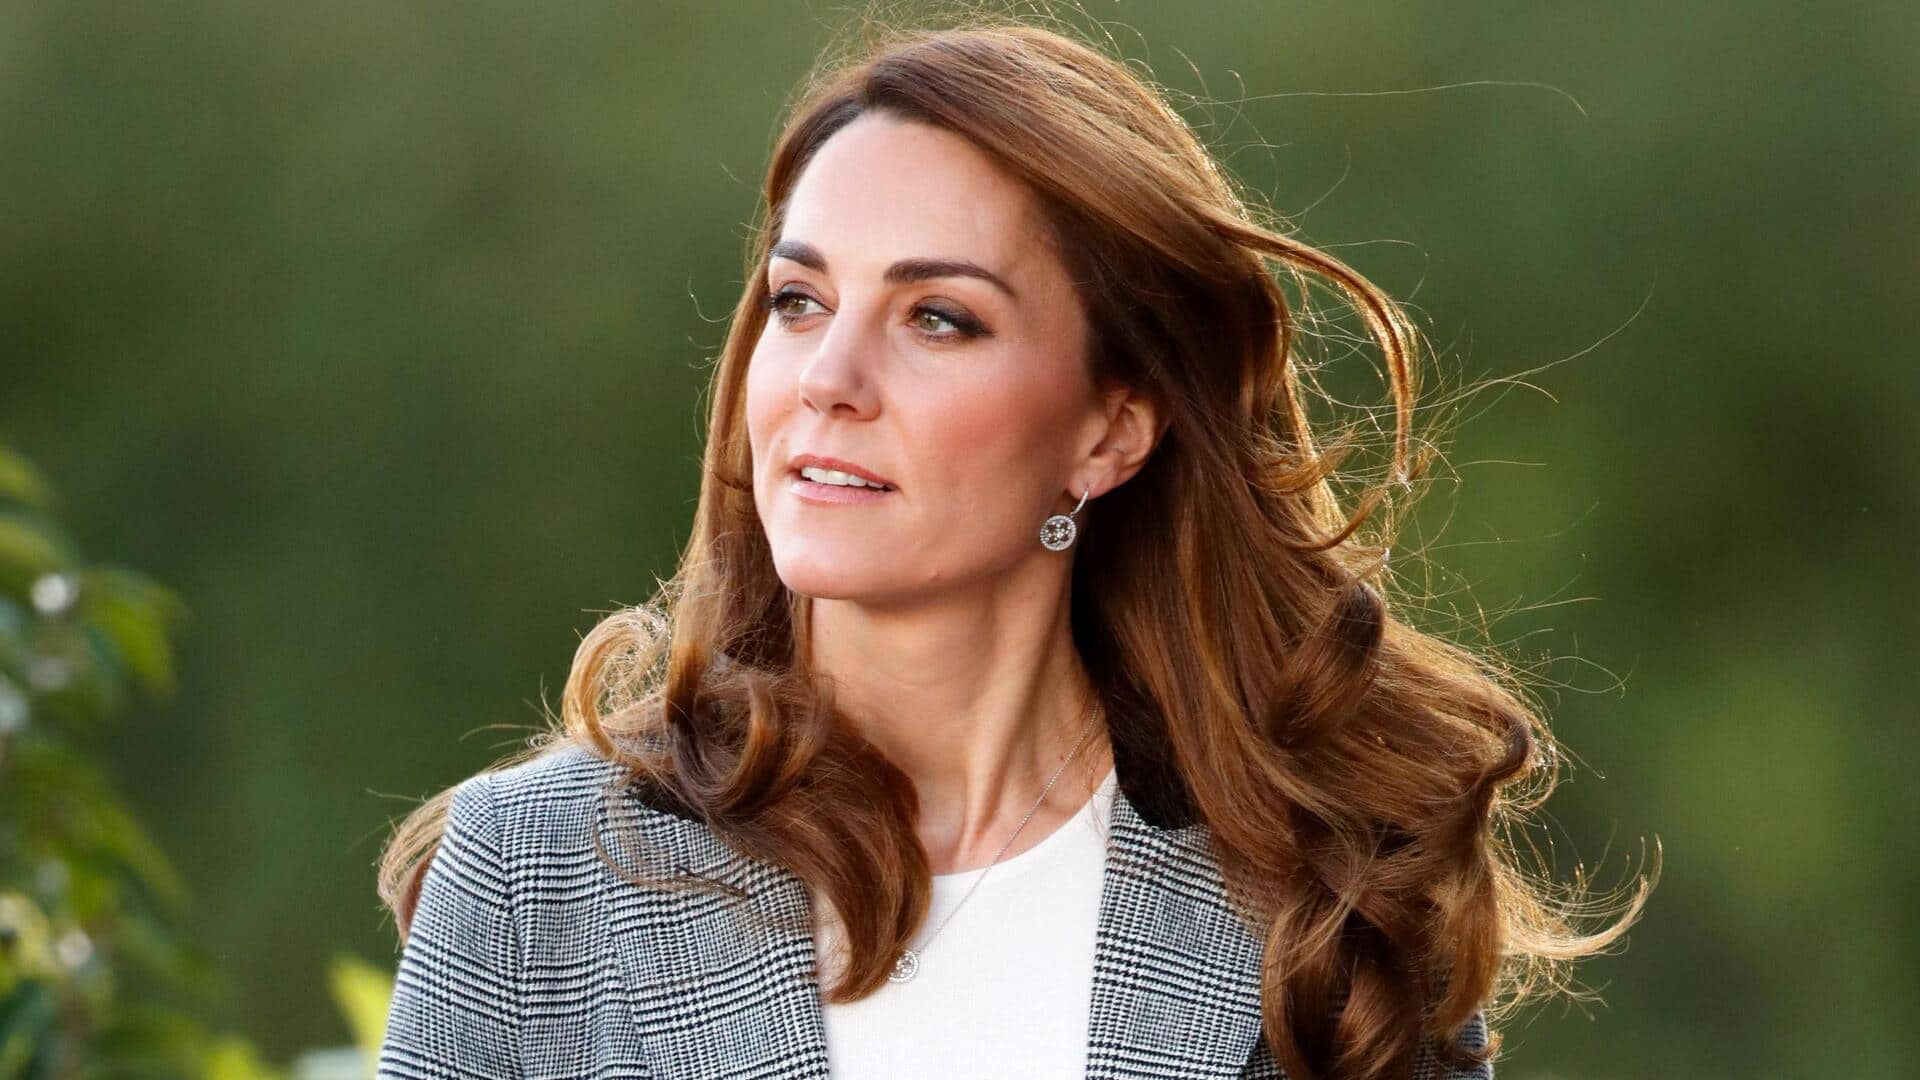 Kate Middleton spotted 'happy, healthy' with husband? Netizens skeptical